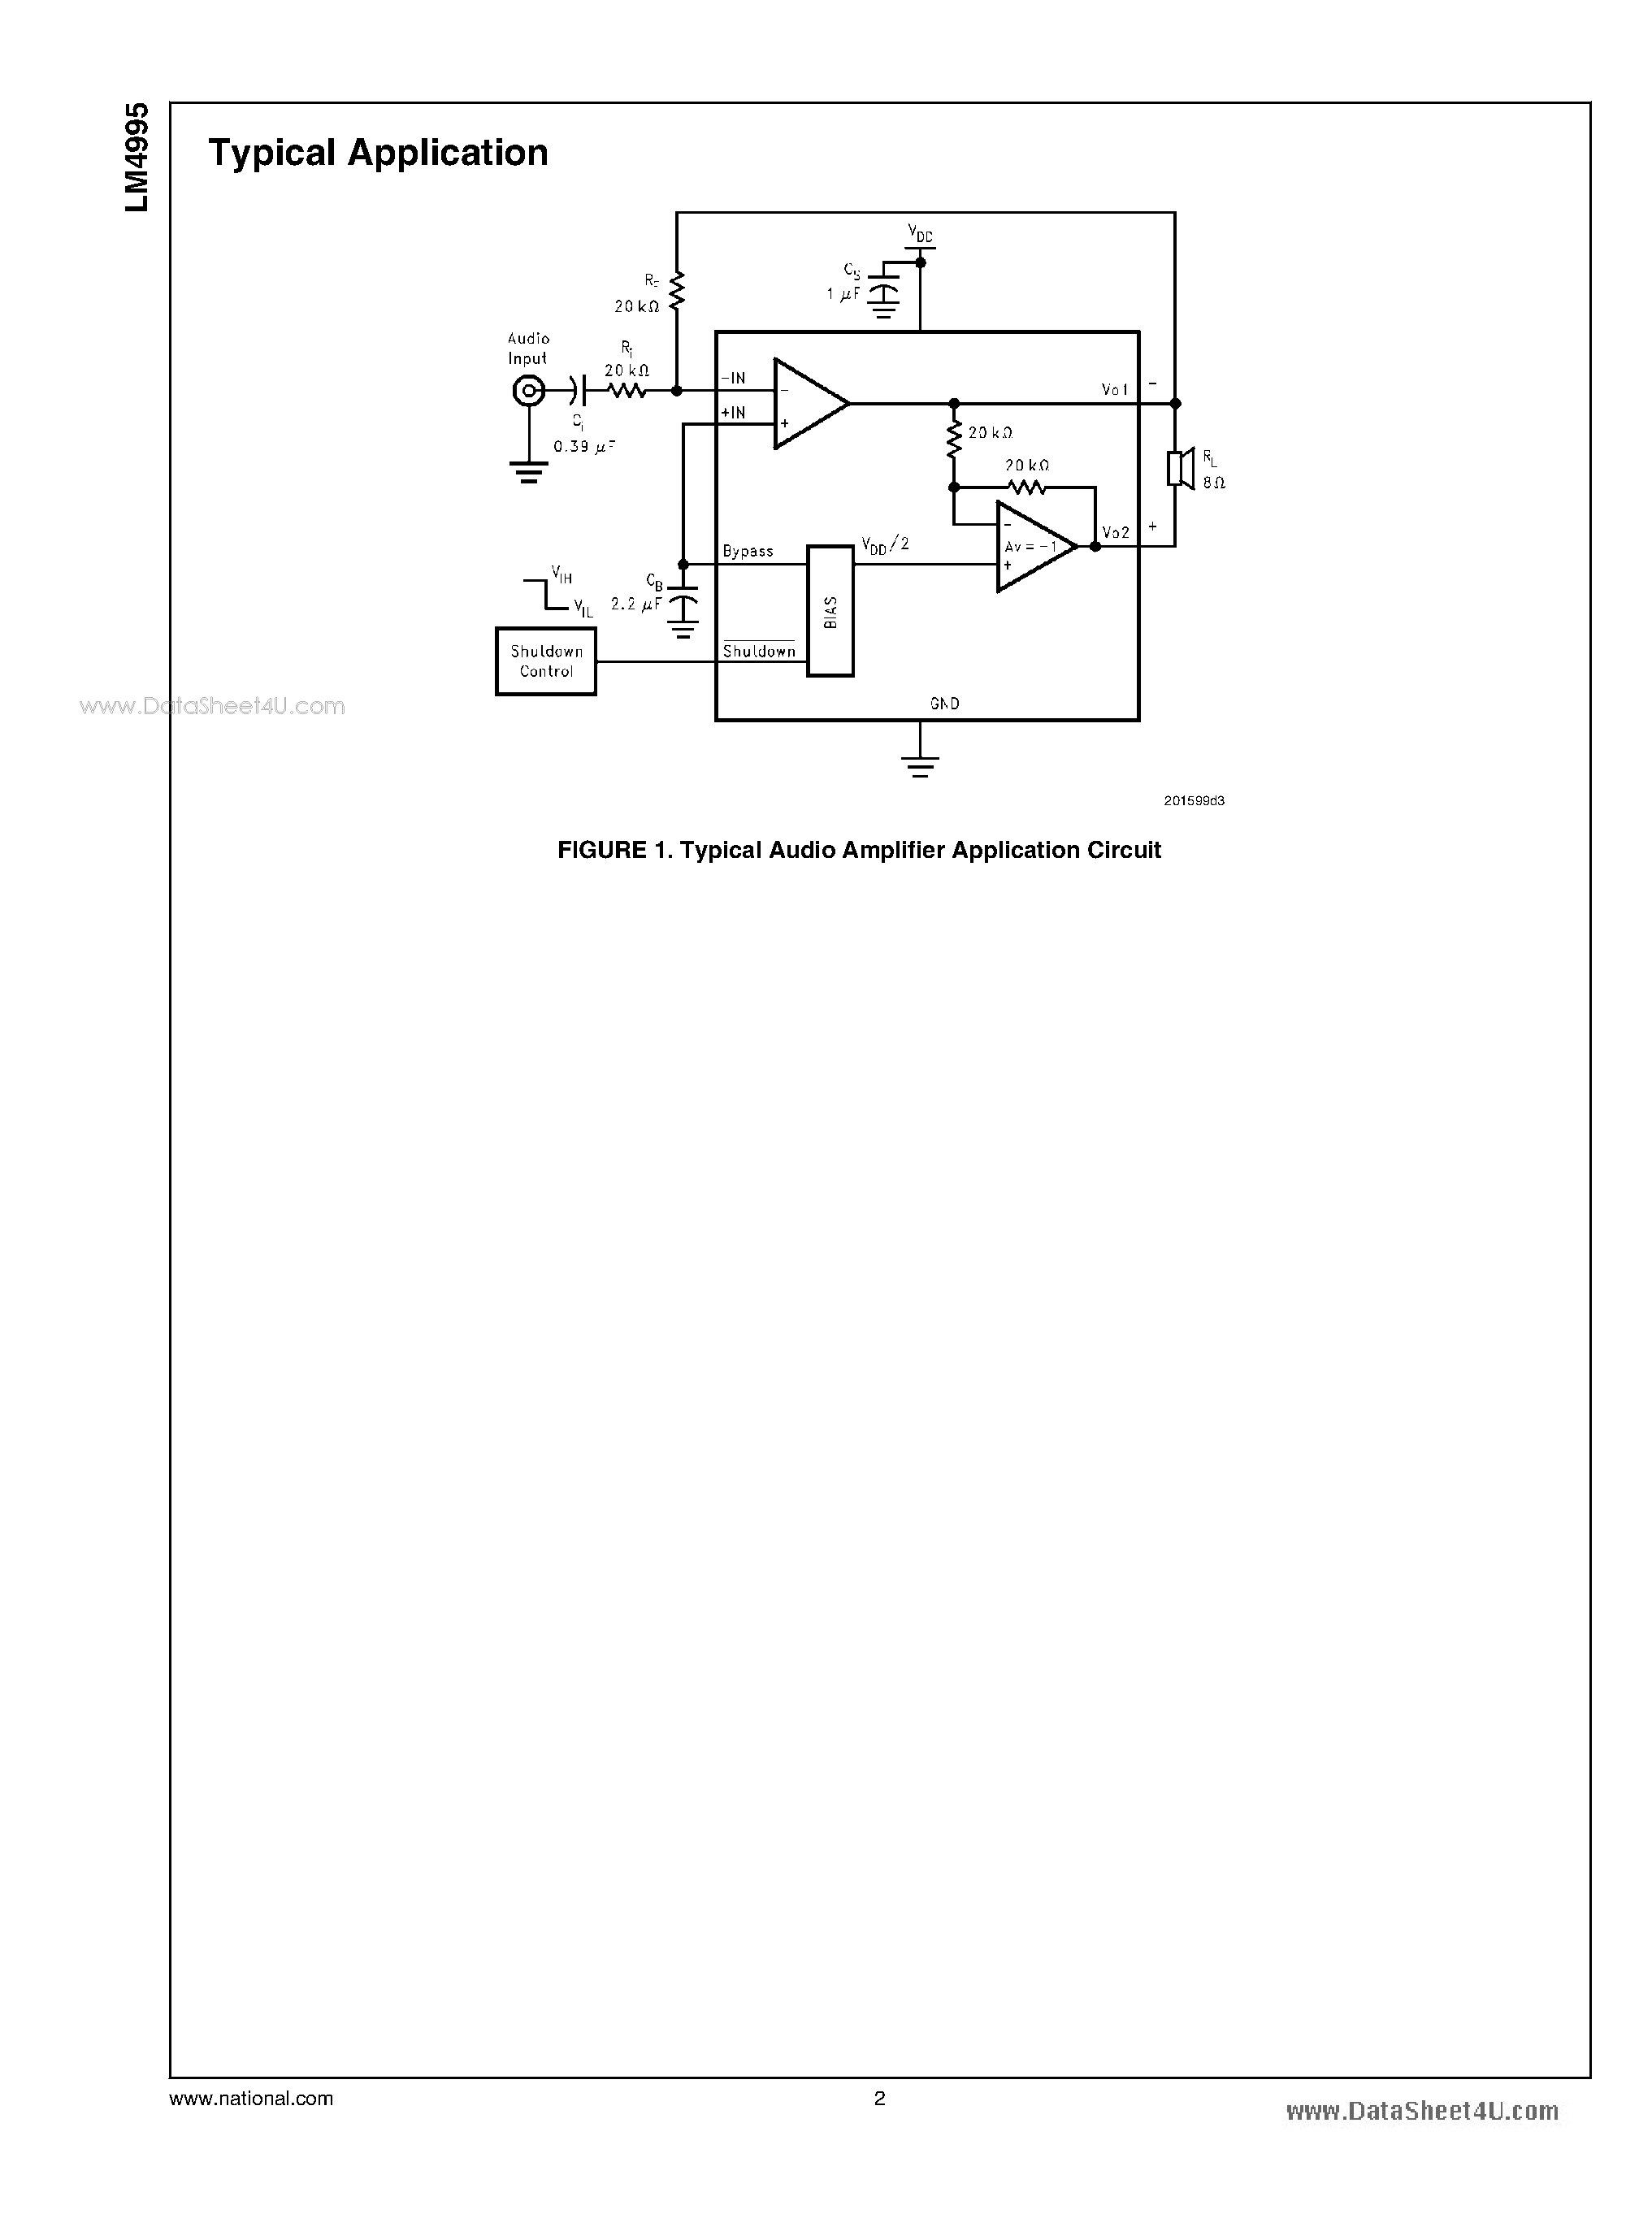 Datasheet LM4995 - 1.3W Audio Power Amplifier page 2